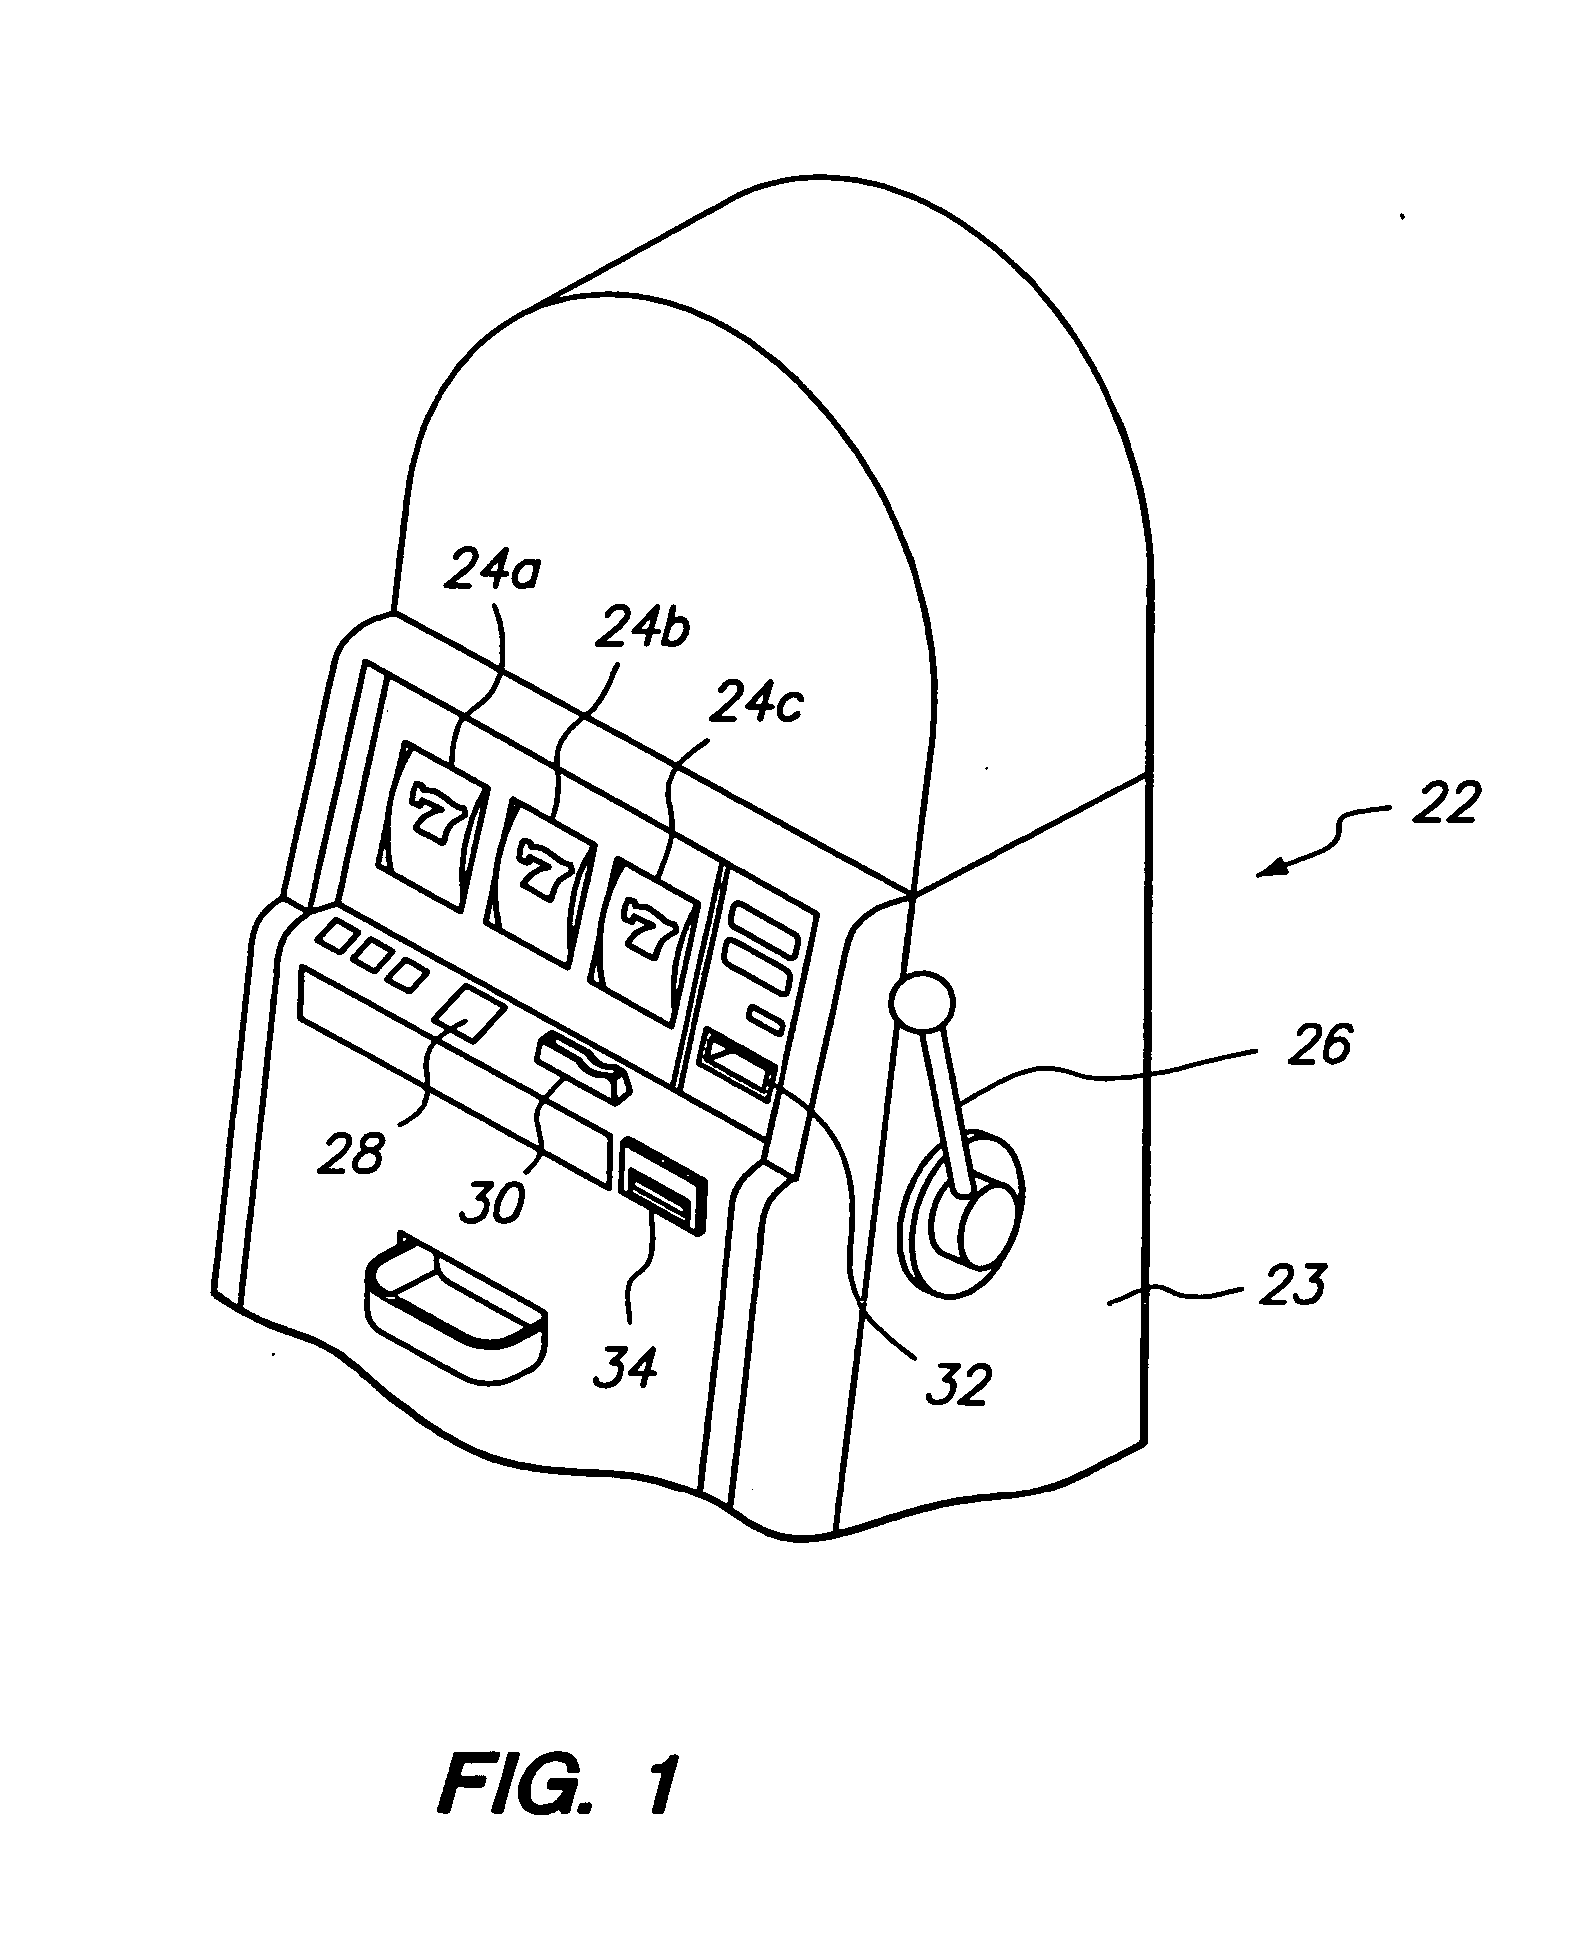 Method and apparatus for supporting wide area gaming network